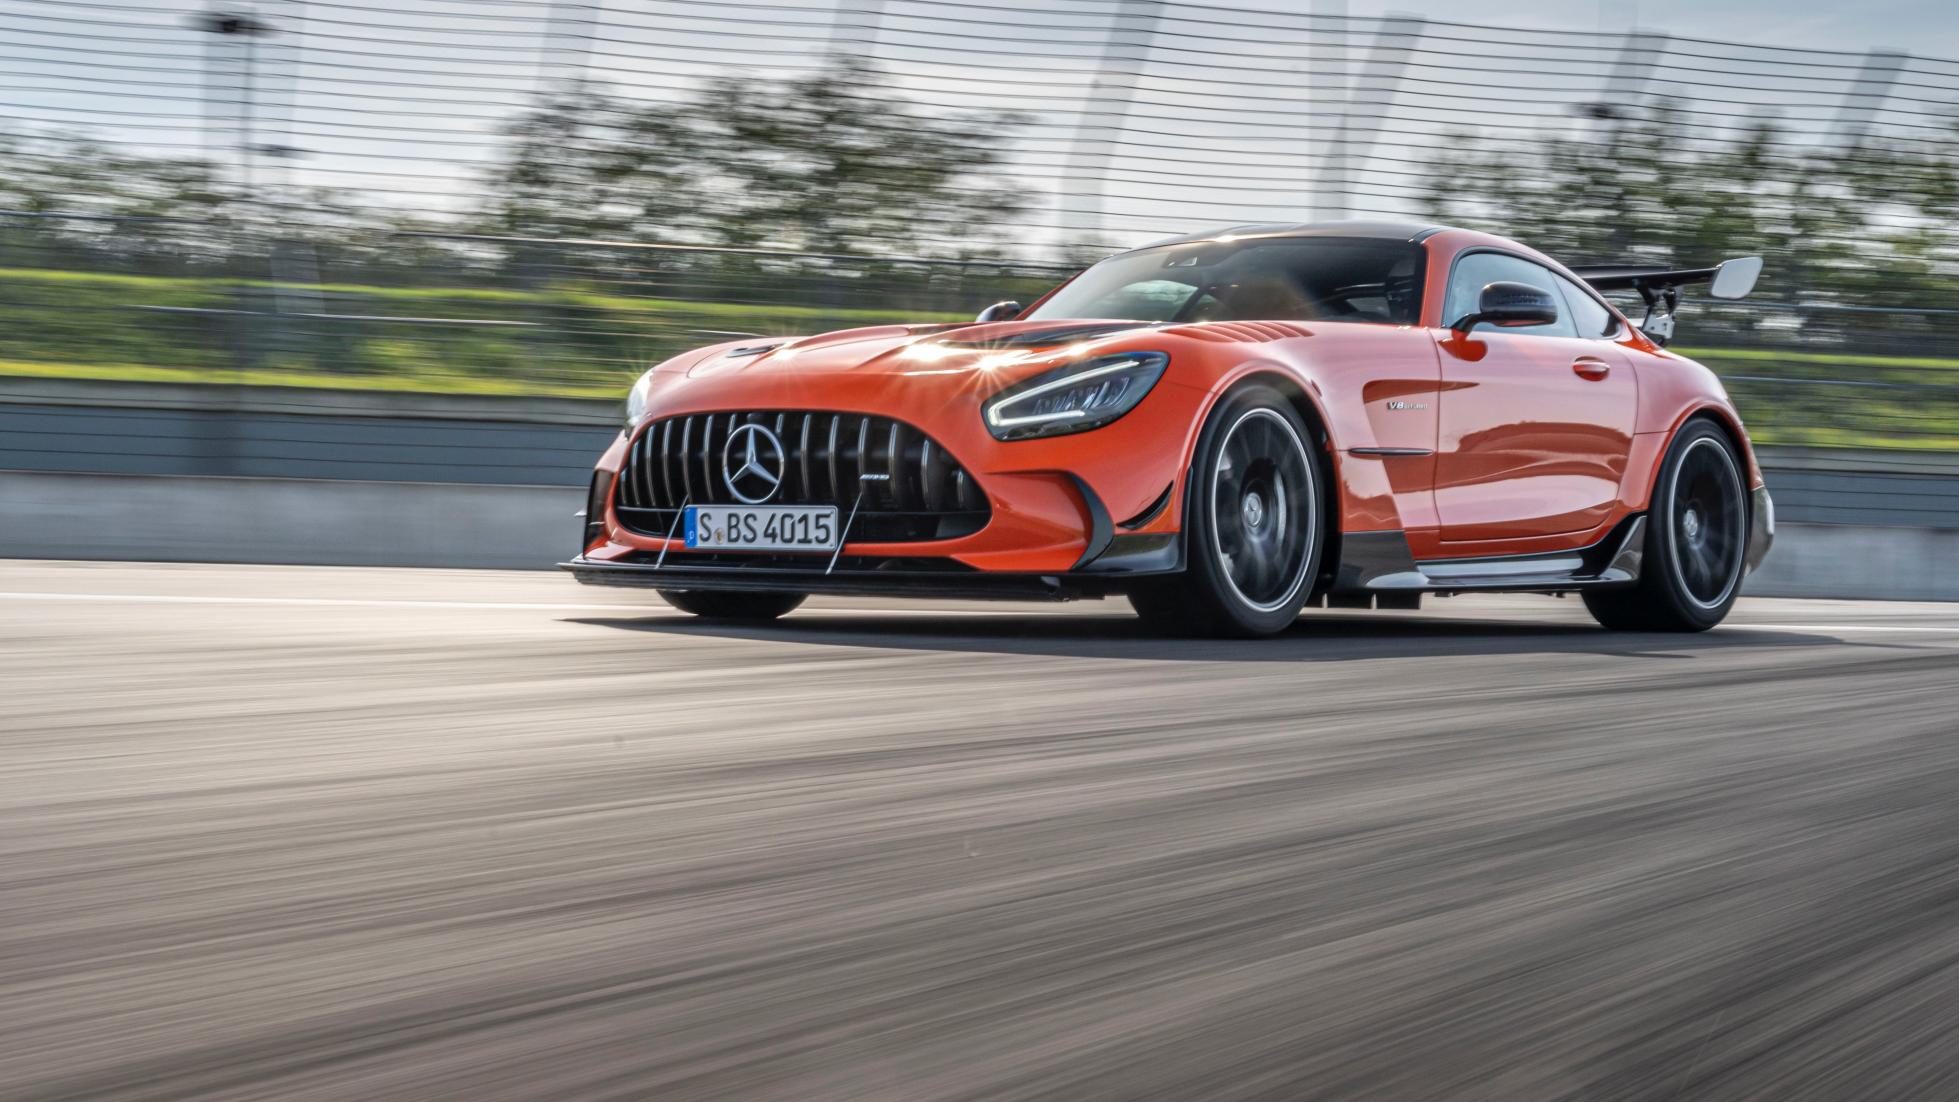 Top Gear's Mercedes-AMG GT R Black Series review